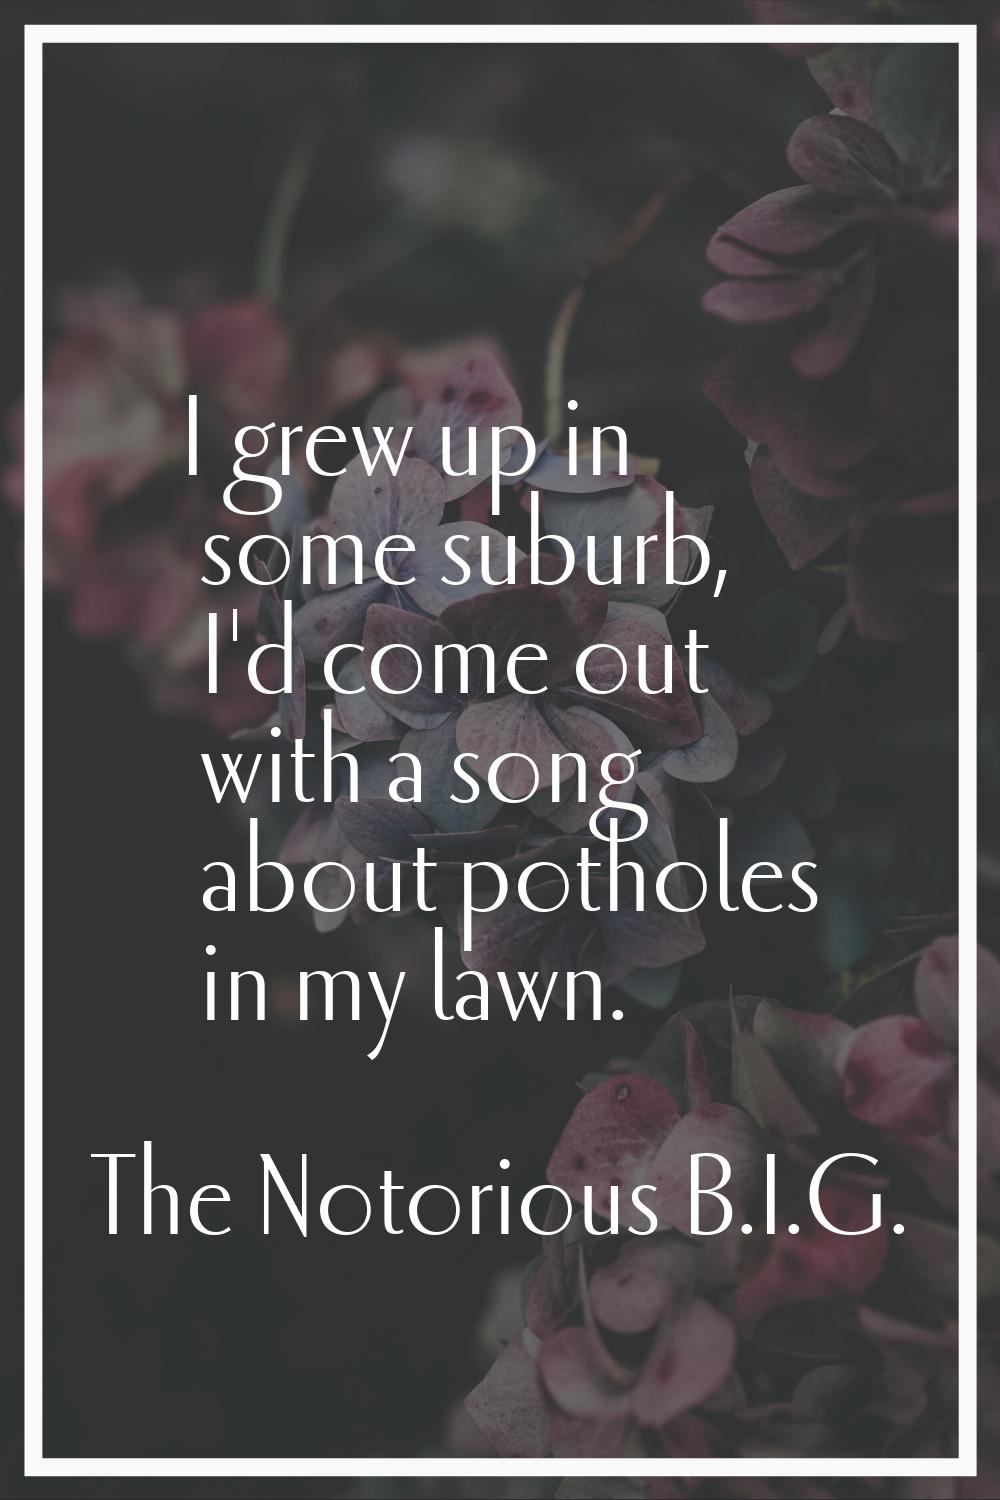 I grew up in some suburb, I'd come out with a song about potholes in my lawn.